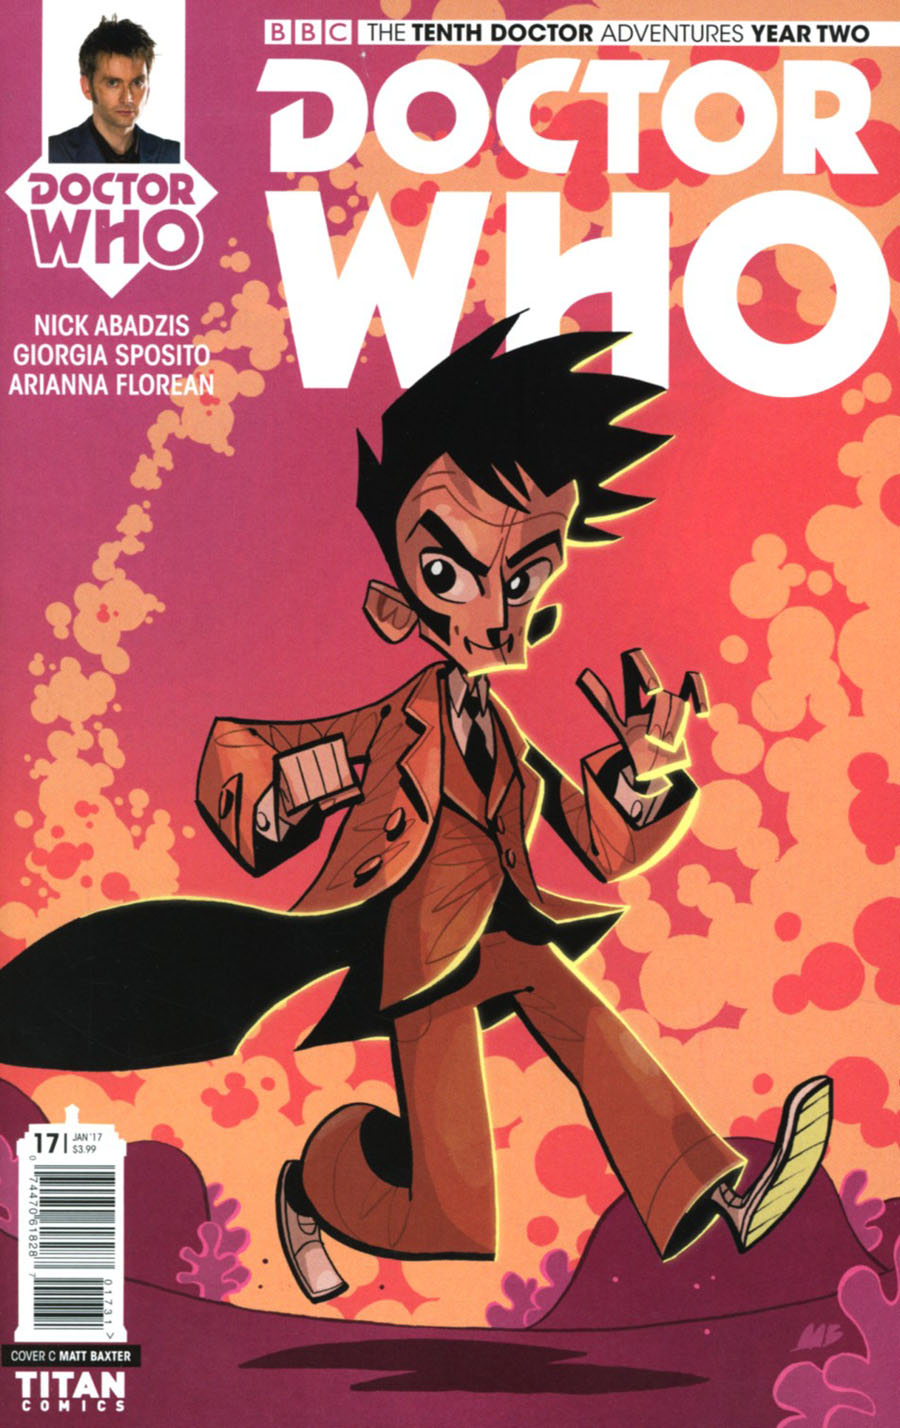 Doctor Who 10th Doctor Year Two #17 Cover C Variant Matt Baxter Cover